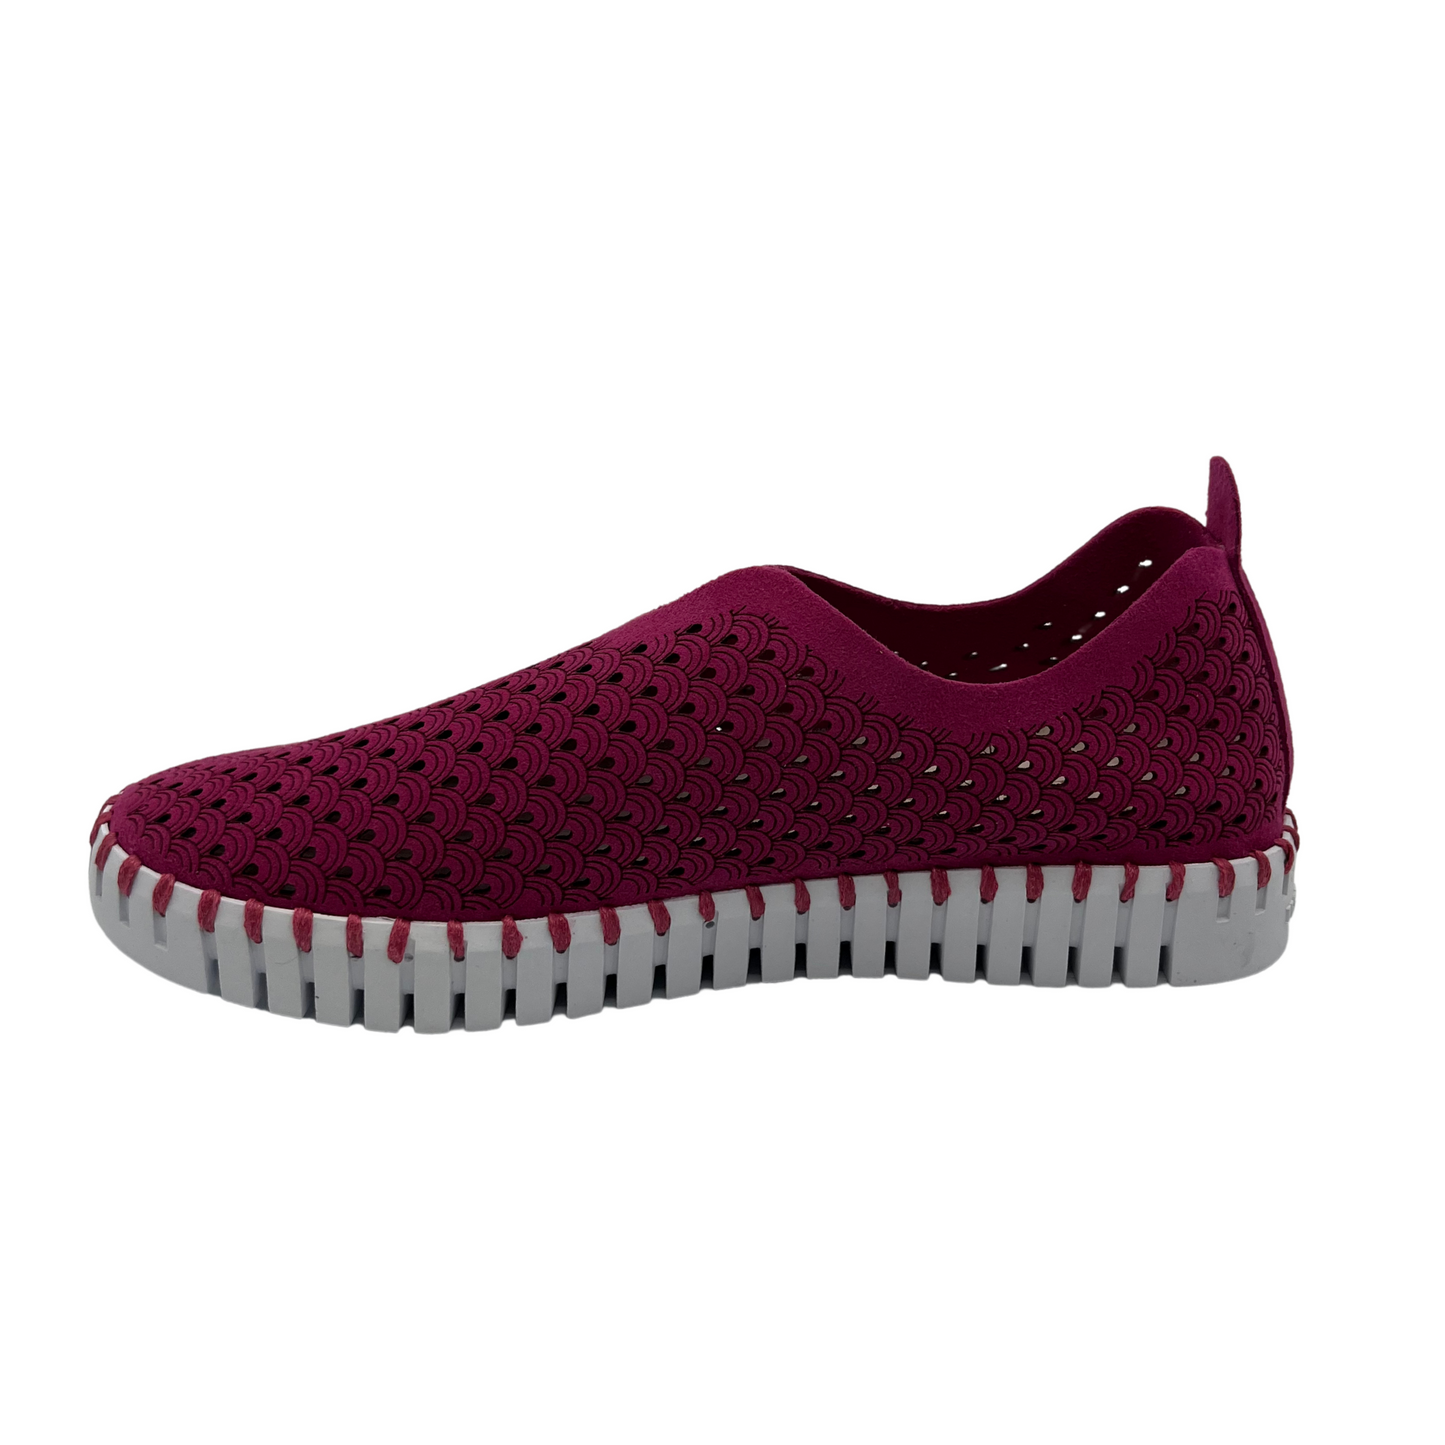 Left facing view of maroon embossed cutout slip on sneakers with white rubber outsole